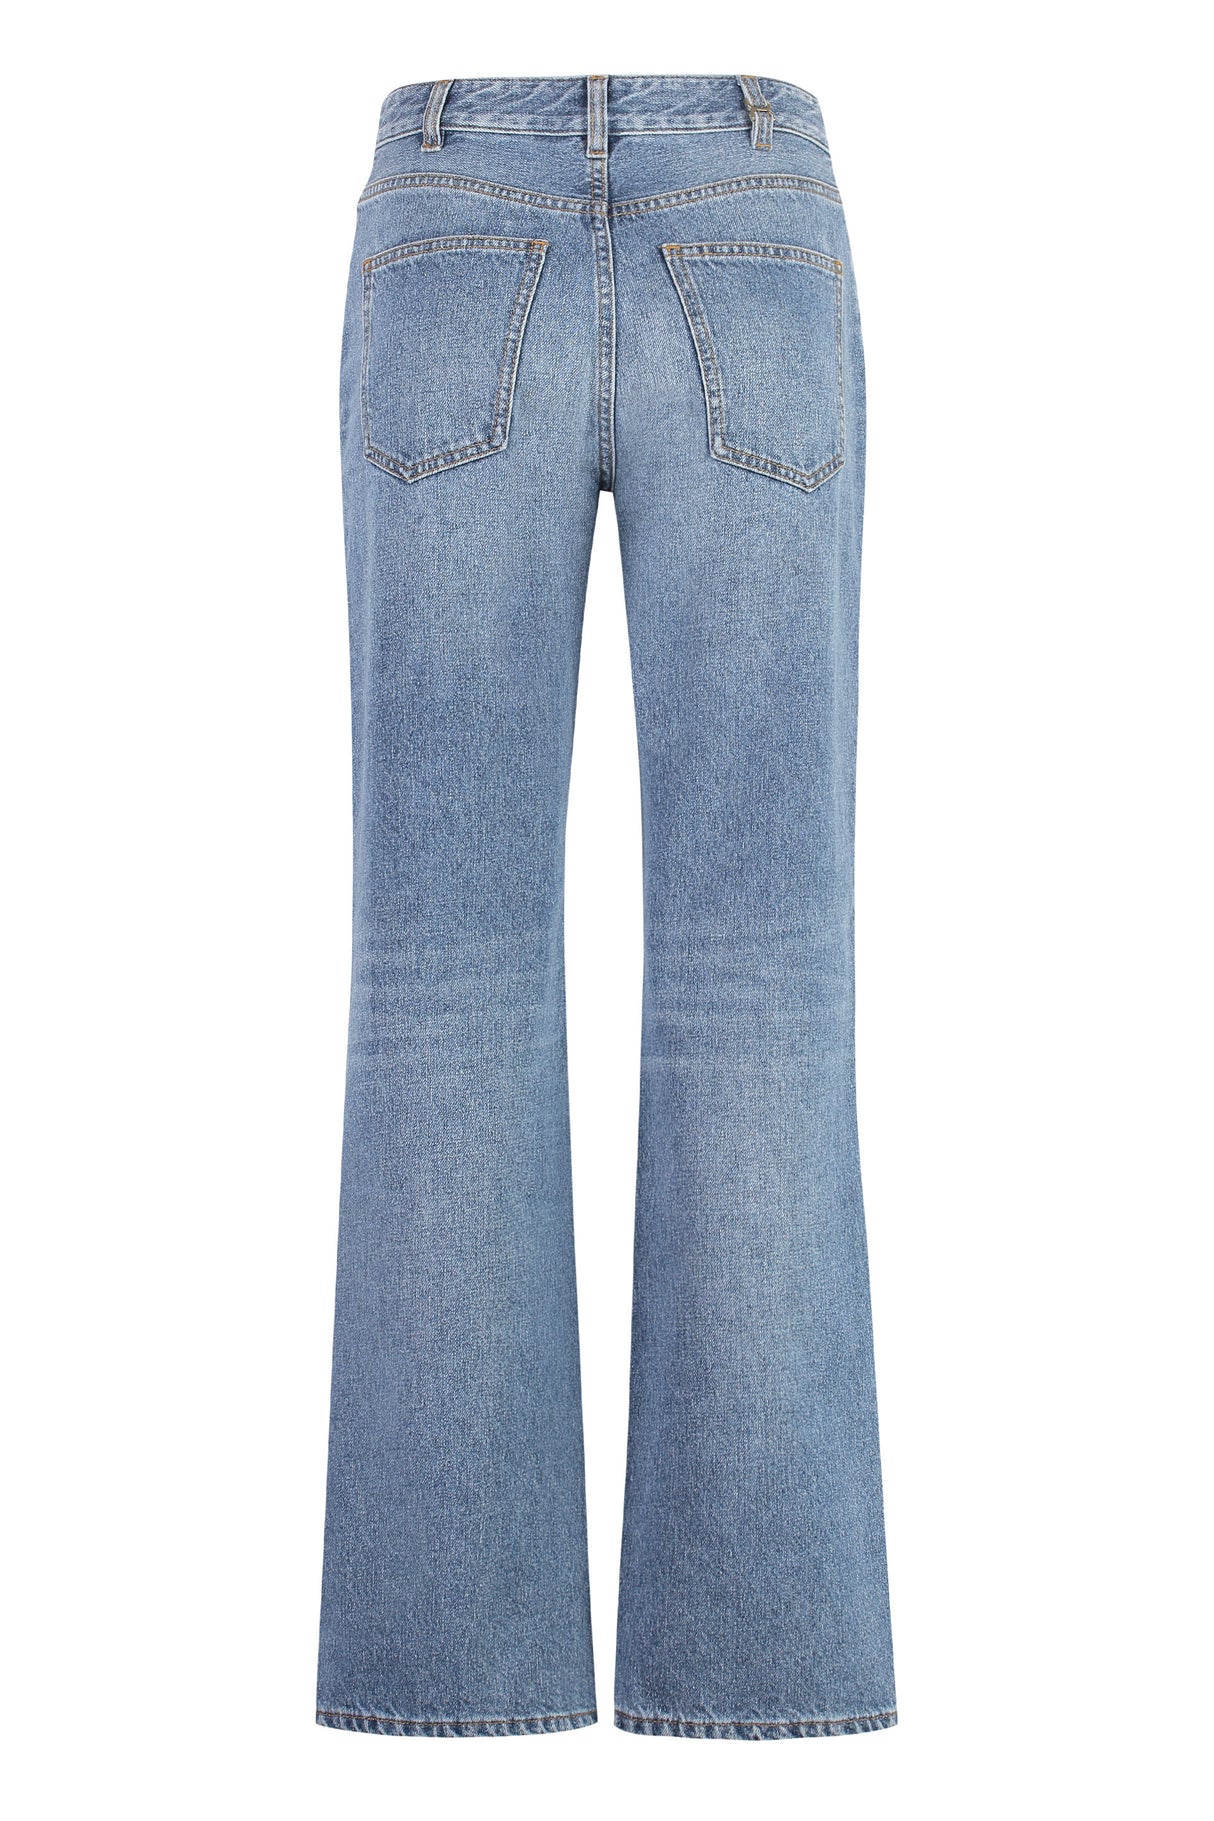 High-Rise Boyfriend Jeans with Visible Stitching for Women